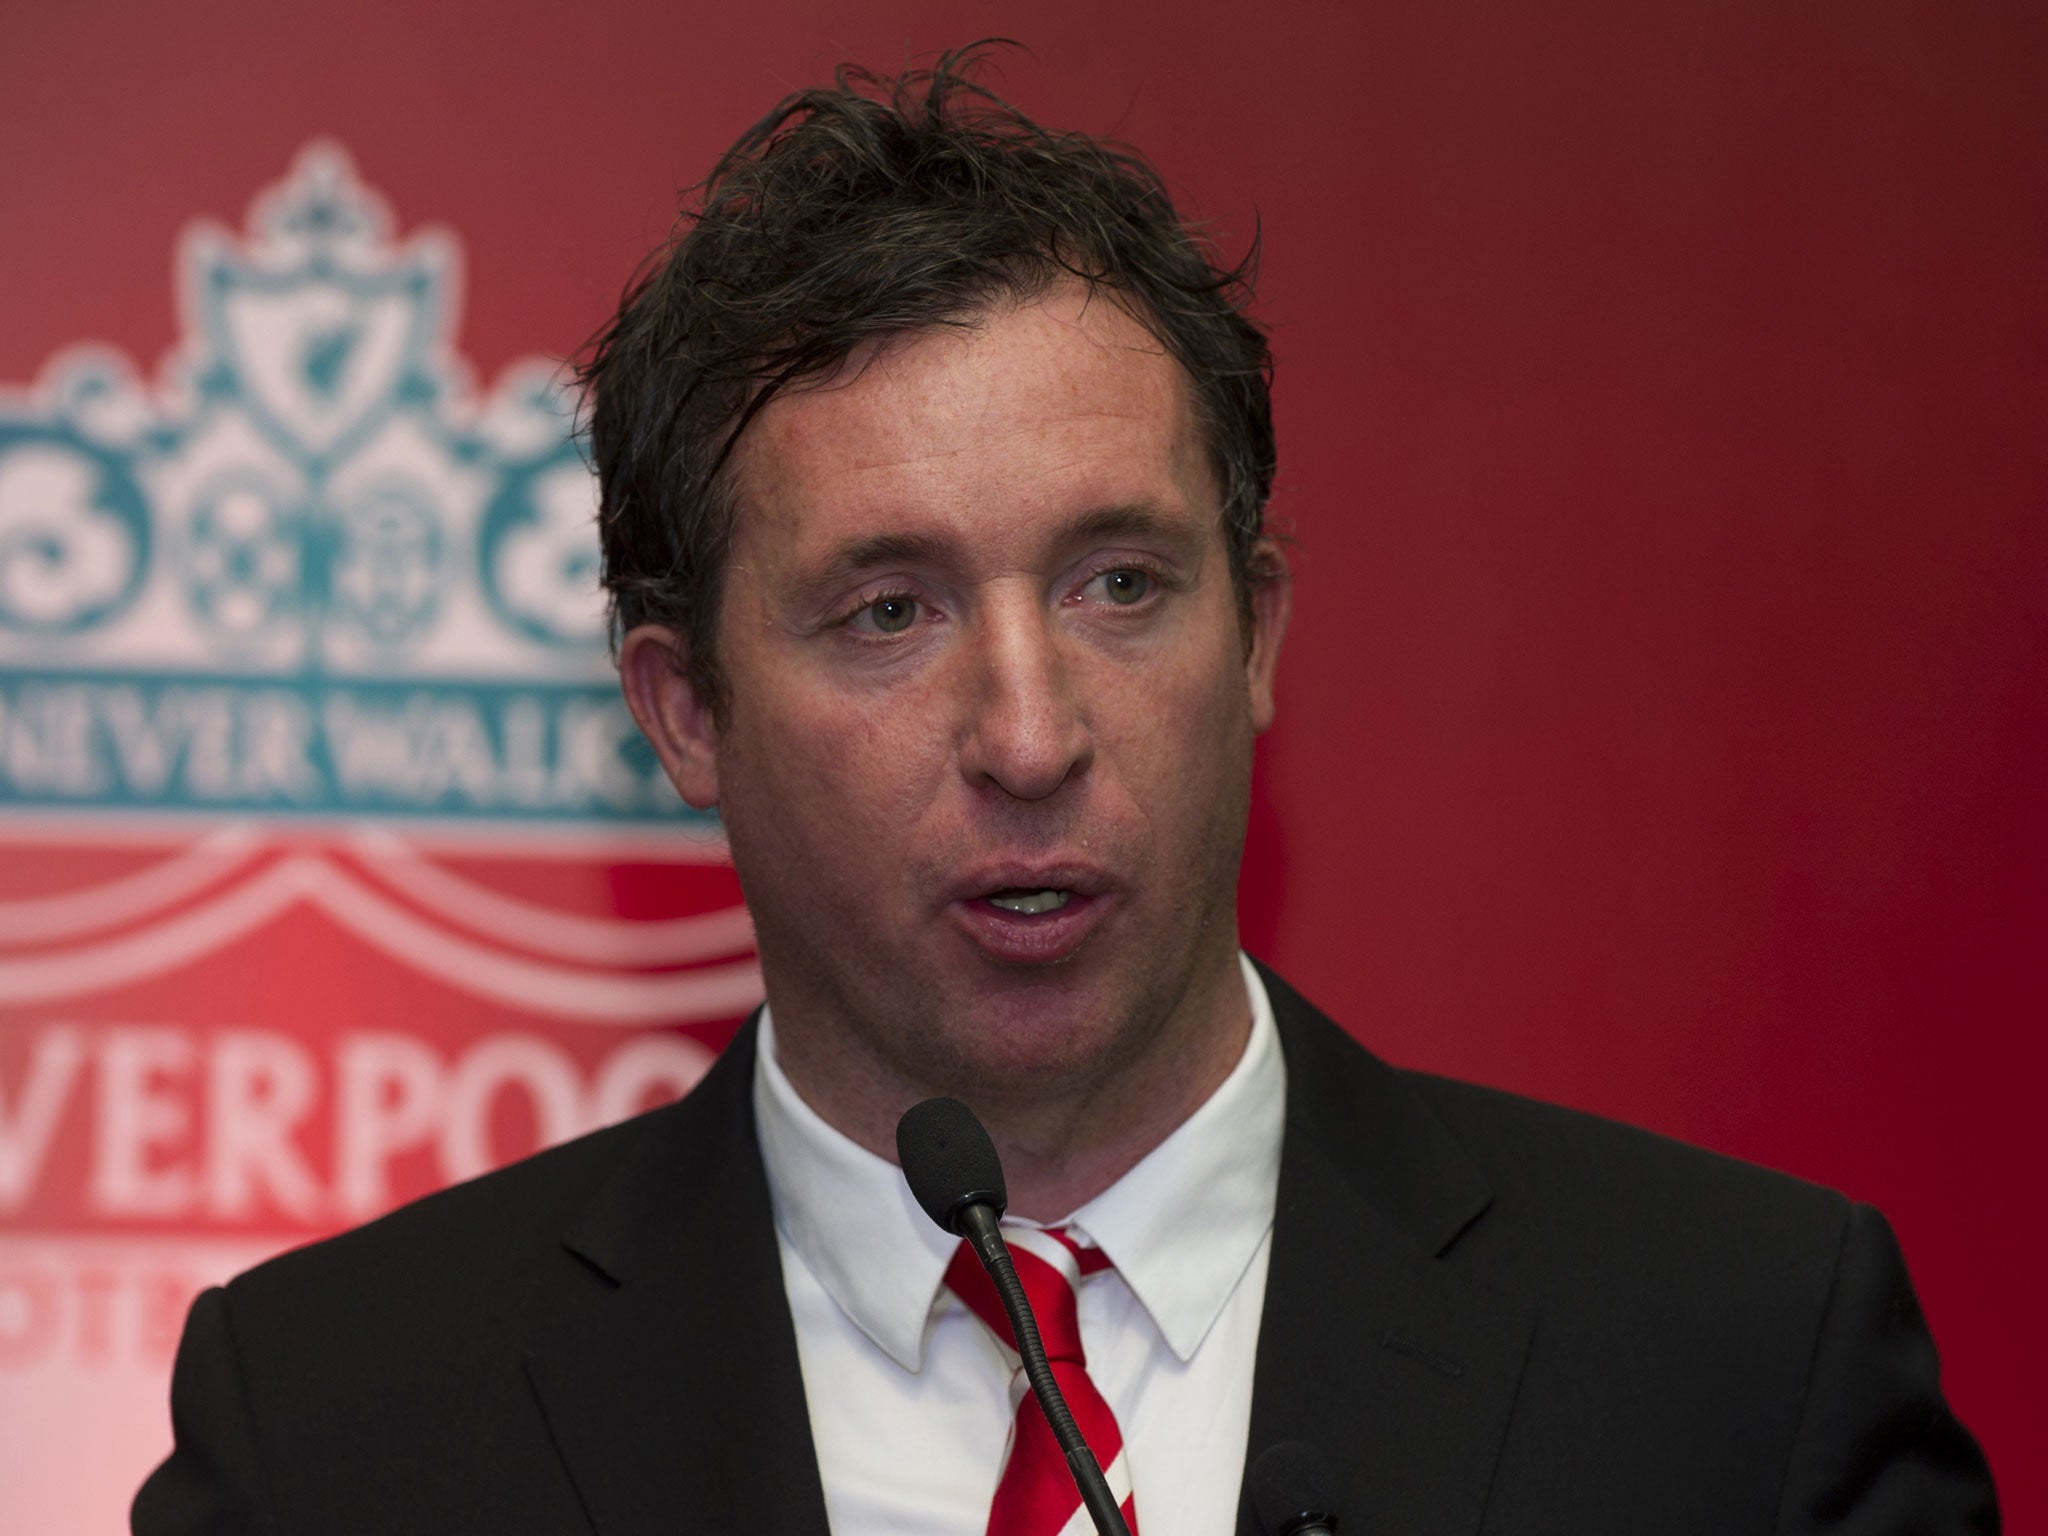 Former Liverpool Football Club and England striker Robbie Fowler speaks to media at an event in New Delhi on January 6, 2014.